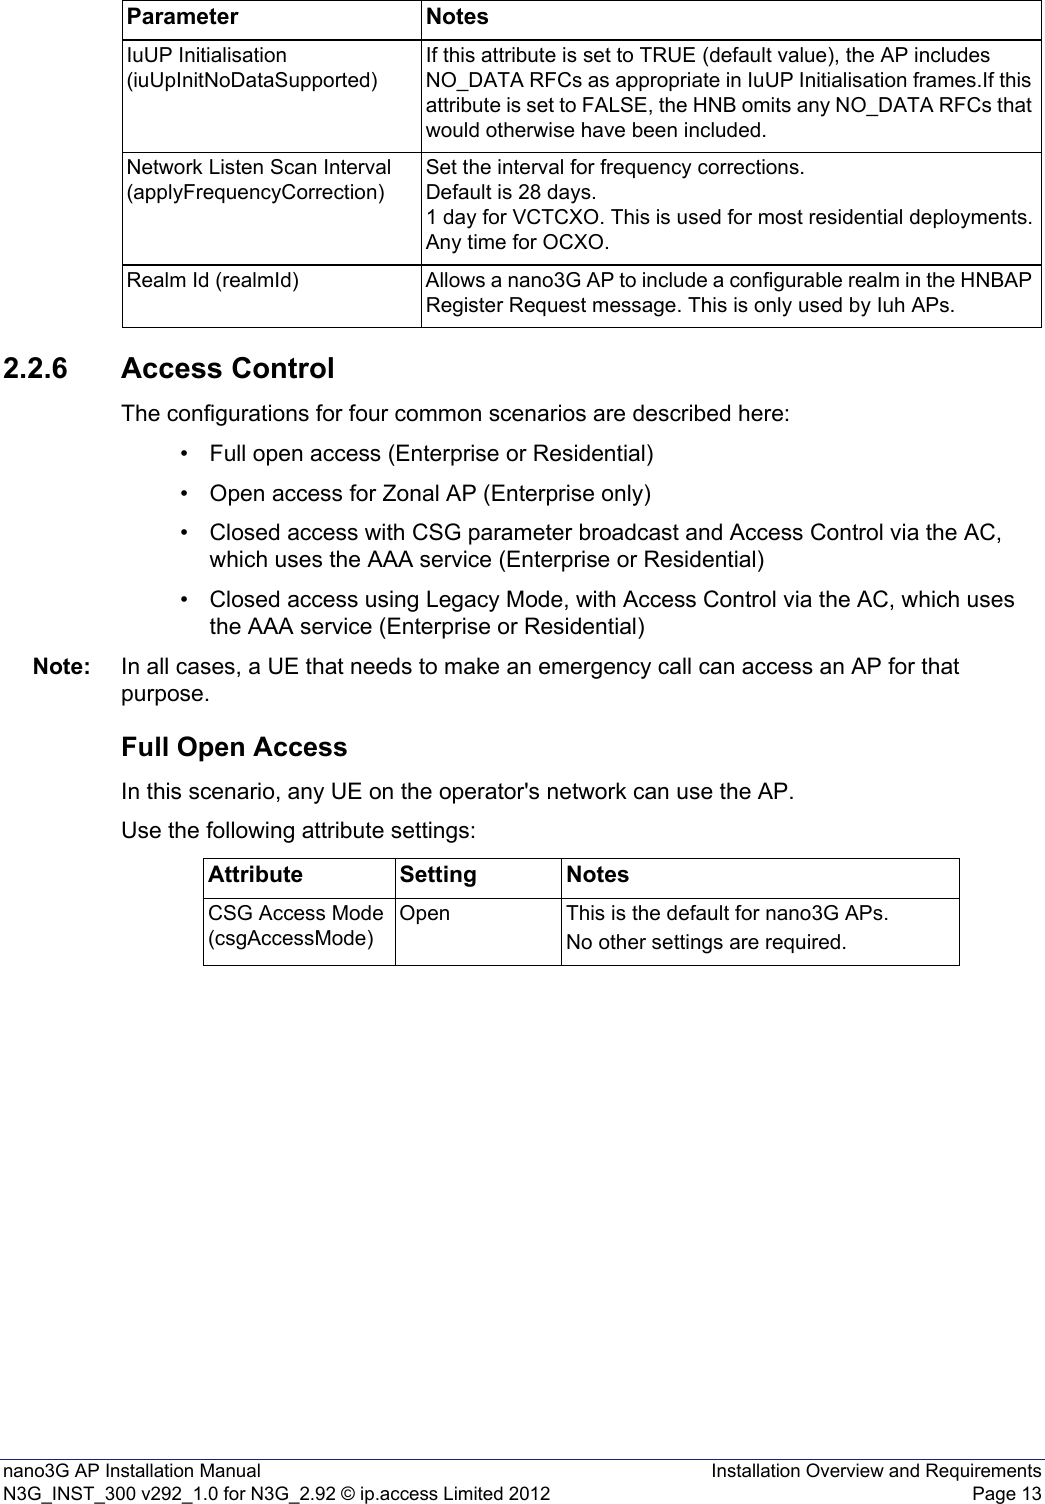 nano3G AP Installation Manual Installation Overview and RequirementsN3G_INST_300 v292_1.0 for N3G_2.92 © ip.access Limited 2012 Page 132.2.6 Access ControlThe configurations for four common scenarios are described here:• Full open access (Enterprise or Residential)• Open access for Zonal AP (Enterprise only)• Closed access with CSG parameter broadcast and Access Control via the AC, which uses the AAA service (Enterprise or Residential)• Closed access using Legacy Mode, with Access Control via the AC, which uses the AAA service (Enterprise or Residential)Note: In all cases, a UE that needs to make an emergency call can access an AP for that purpose.Full Open AccessIn this scenario, any UE on the operator&apos;s network can use the AP.Use the following attribute settings:IuUP Initialisation (iuUpInitNoDataSupported)If this attribute is set to TRUE (default value), the AP includes NO_DATA RFCs as appropriate in IuUP Initialisation frames.If this attribute is set to FALSE, the HNB omits any NO_DATA RFCs that would otherwise have been included.Network Listen Scan Interval (applyFrequencyCorrection)Set the interval for frequency corrections. Default is 28 days. 1 day for VCTCXO. This is used for most residential deployments.Any time for OCXO.Realm Id (realmId) Allows a nano3G AP to include a configurable realm in the HNBAP Register Request message. This is only used by Iuh APs.Parameter NotesAttribute Setting NotesCSG Access Mode (csgAccessMode)Open This is the default for nano3G APs.No other settings are required.